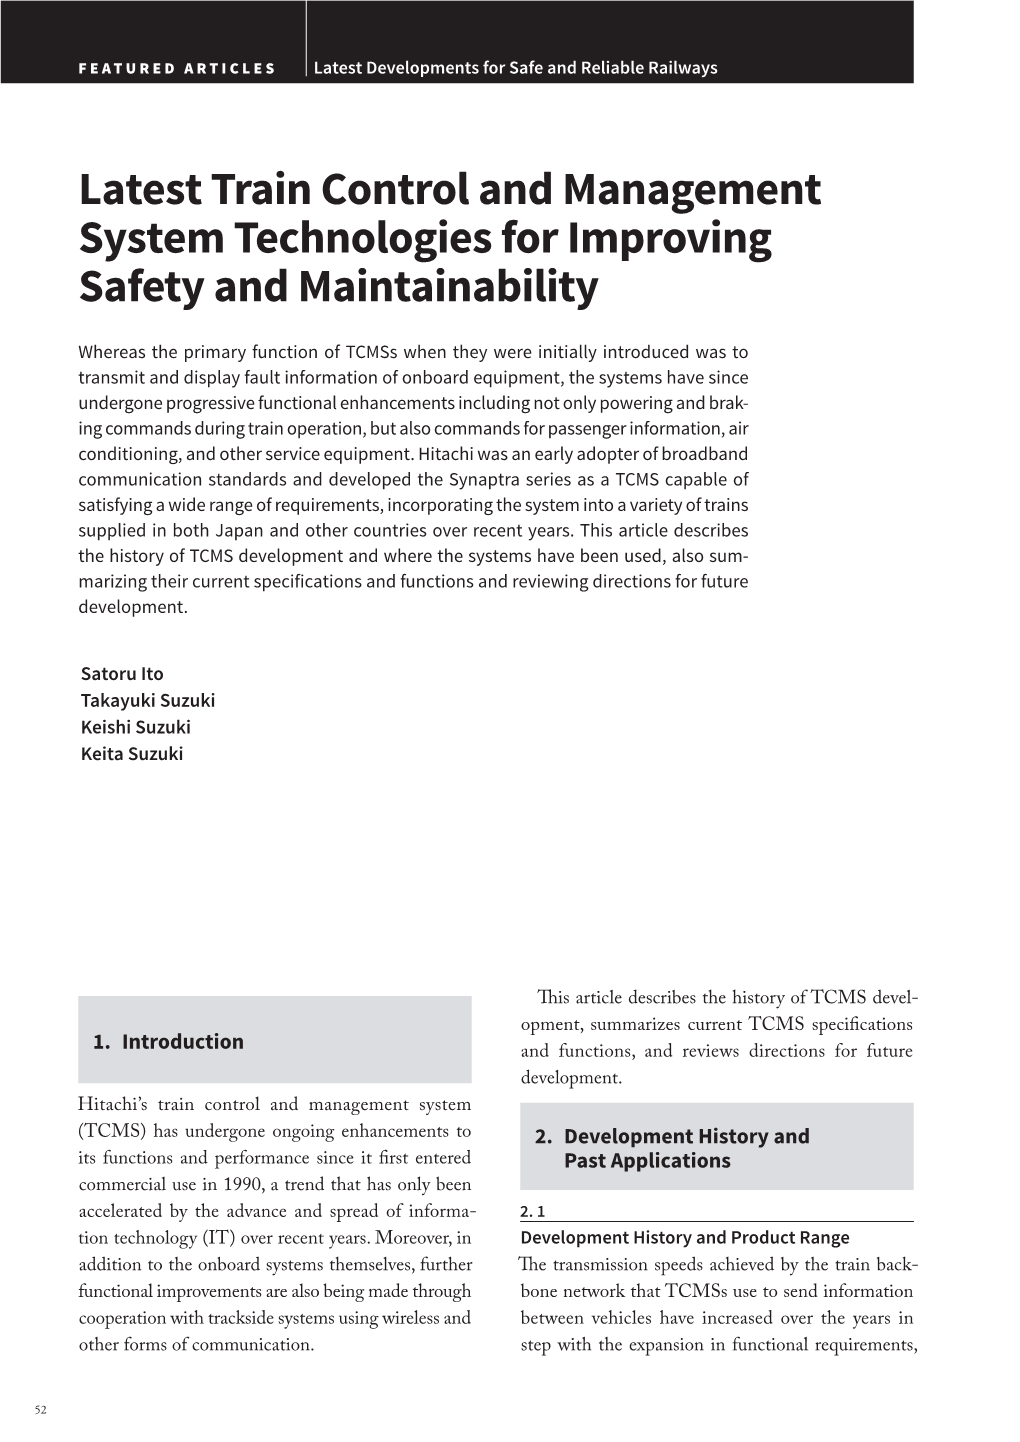 Latest Train Control and Management System Technologies for Improving Safety and Maintainability